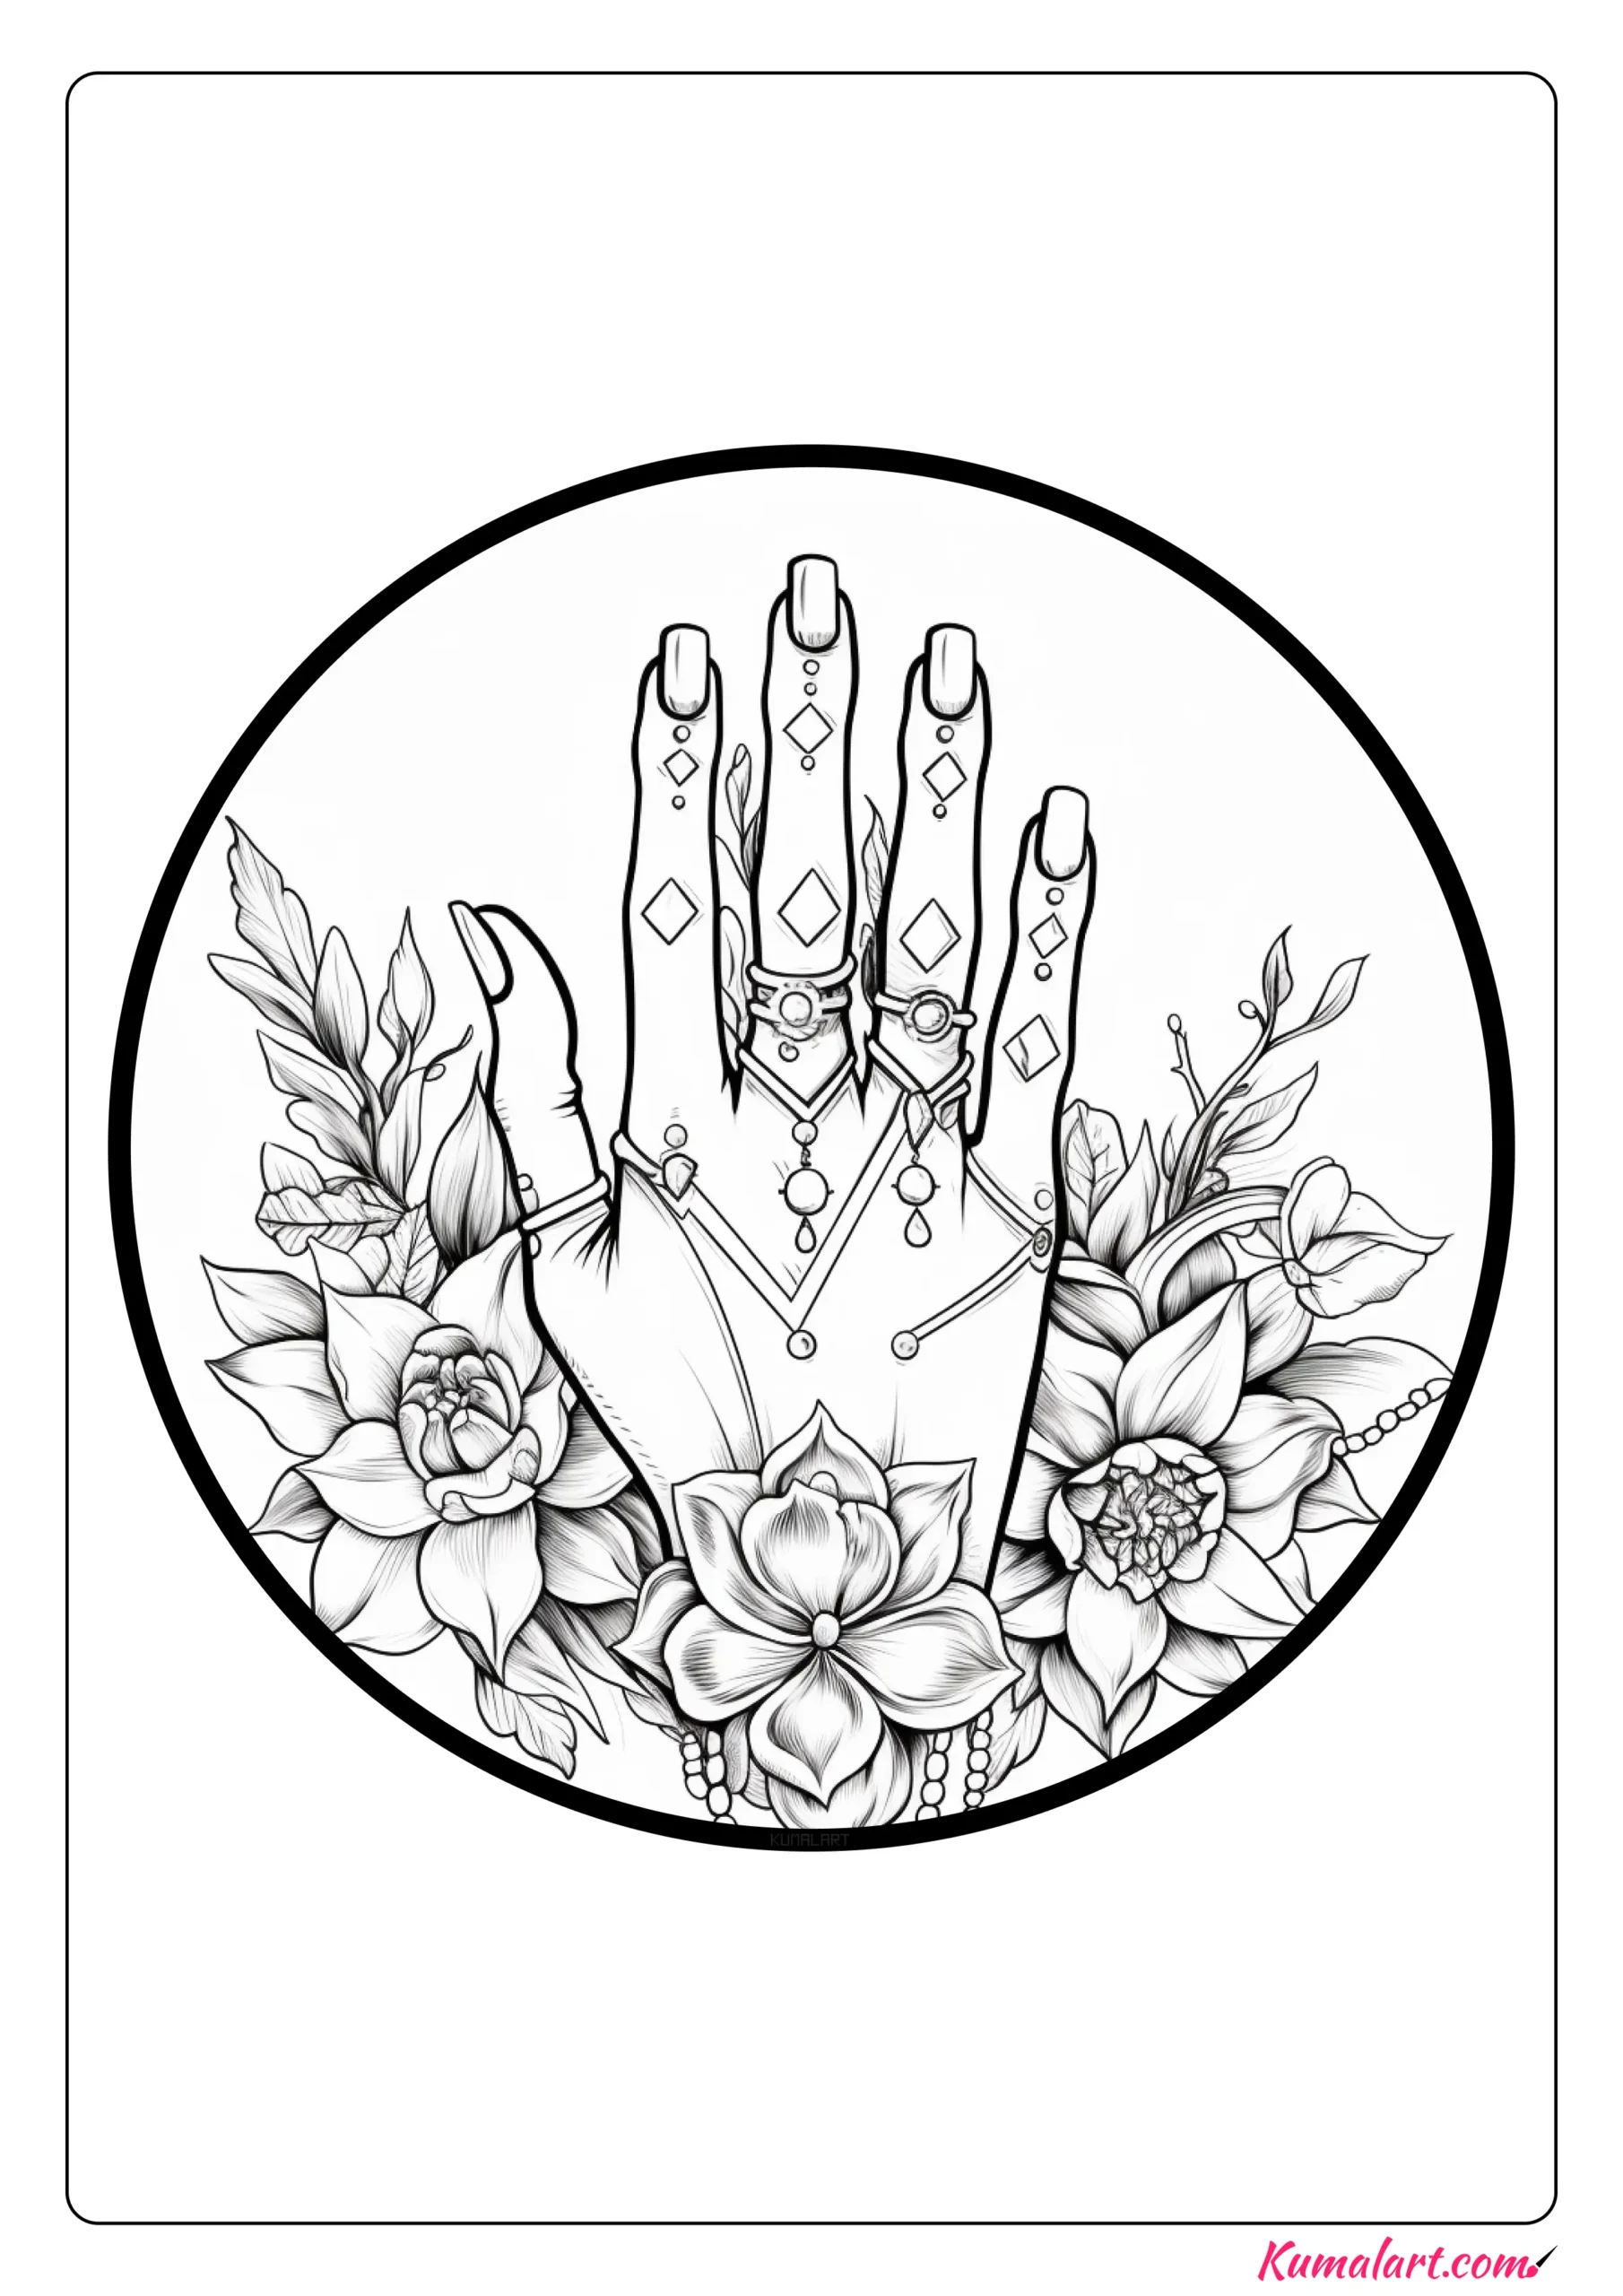 Magnificent Long Nails Coloring Page